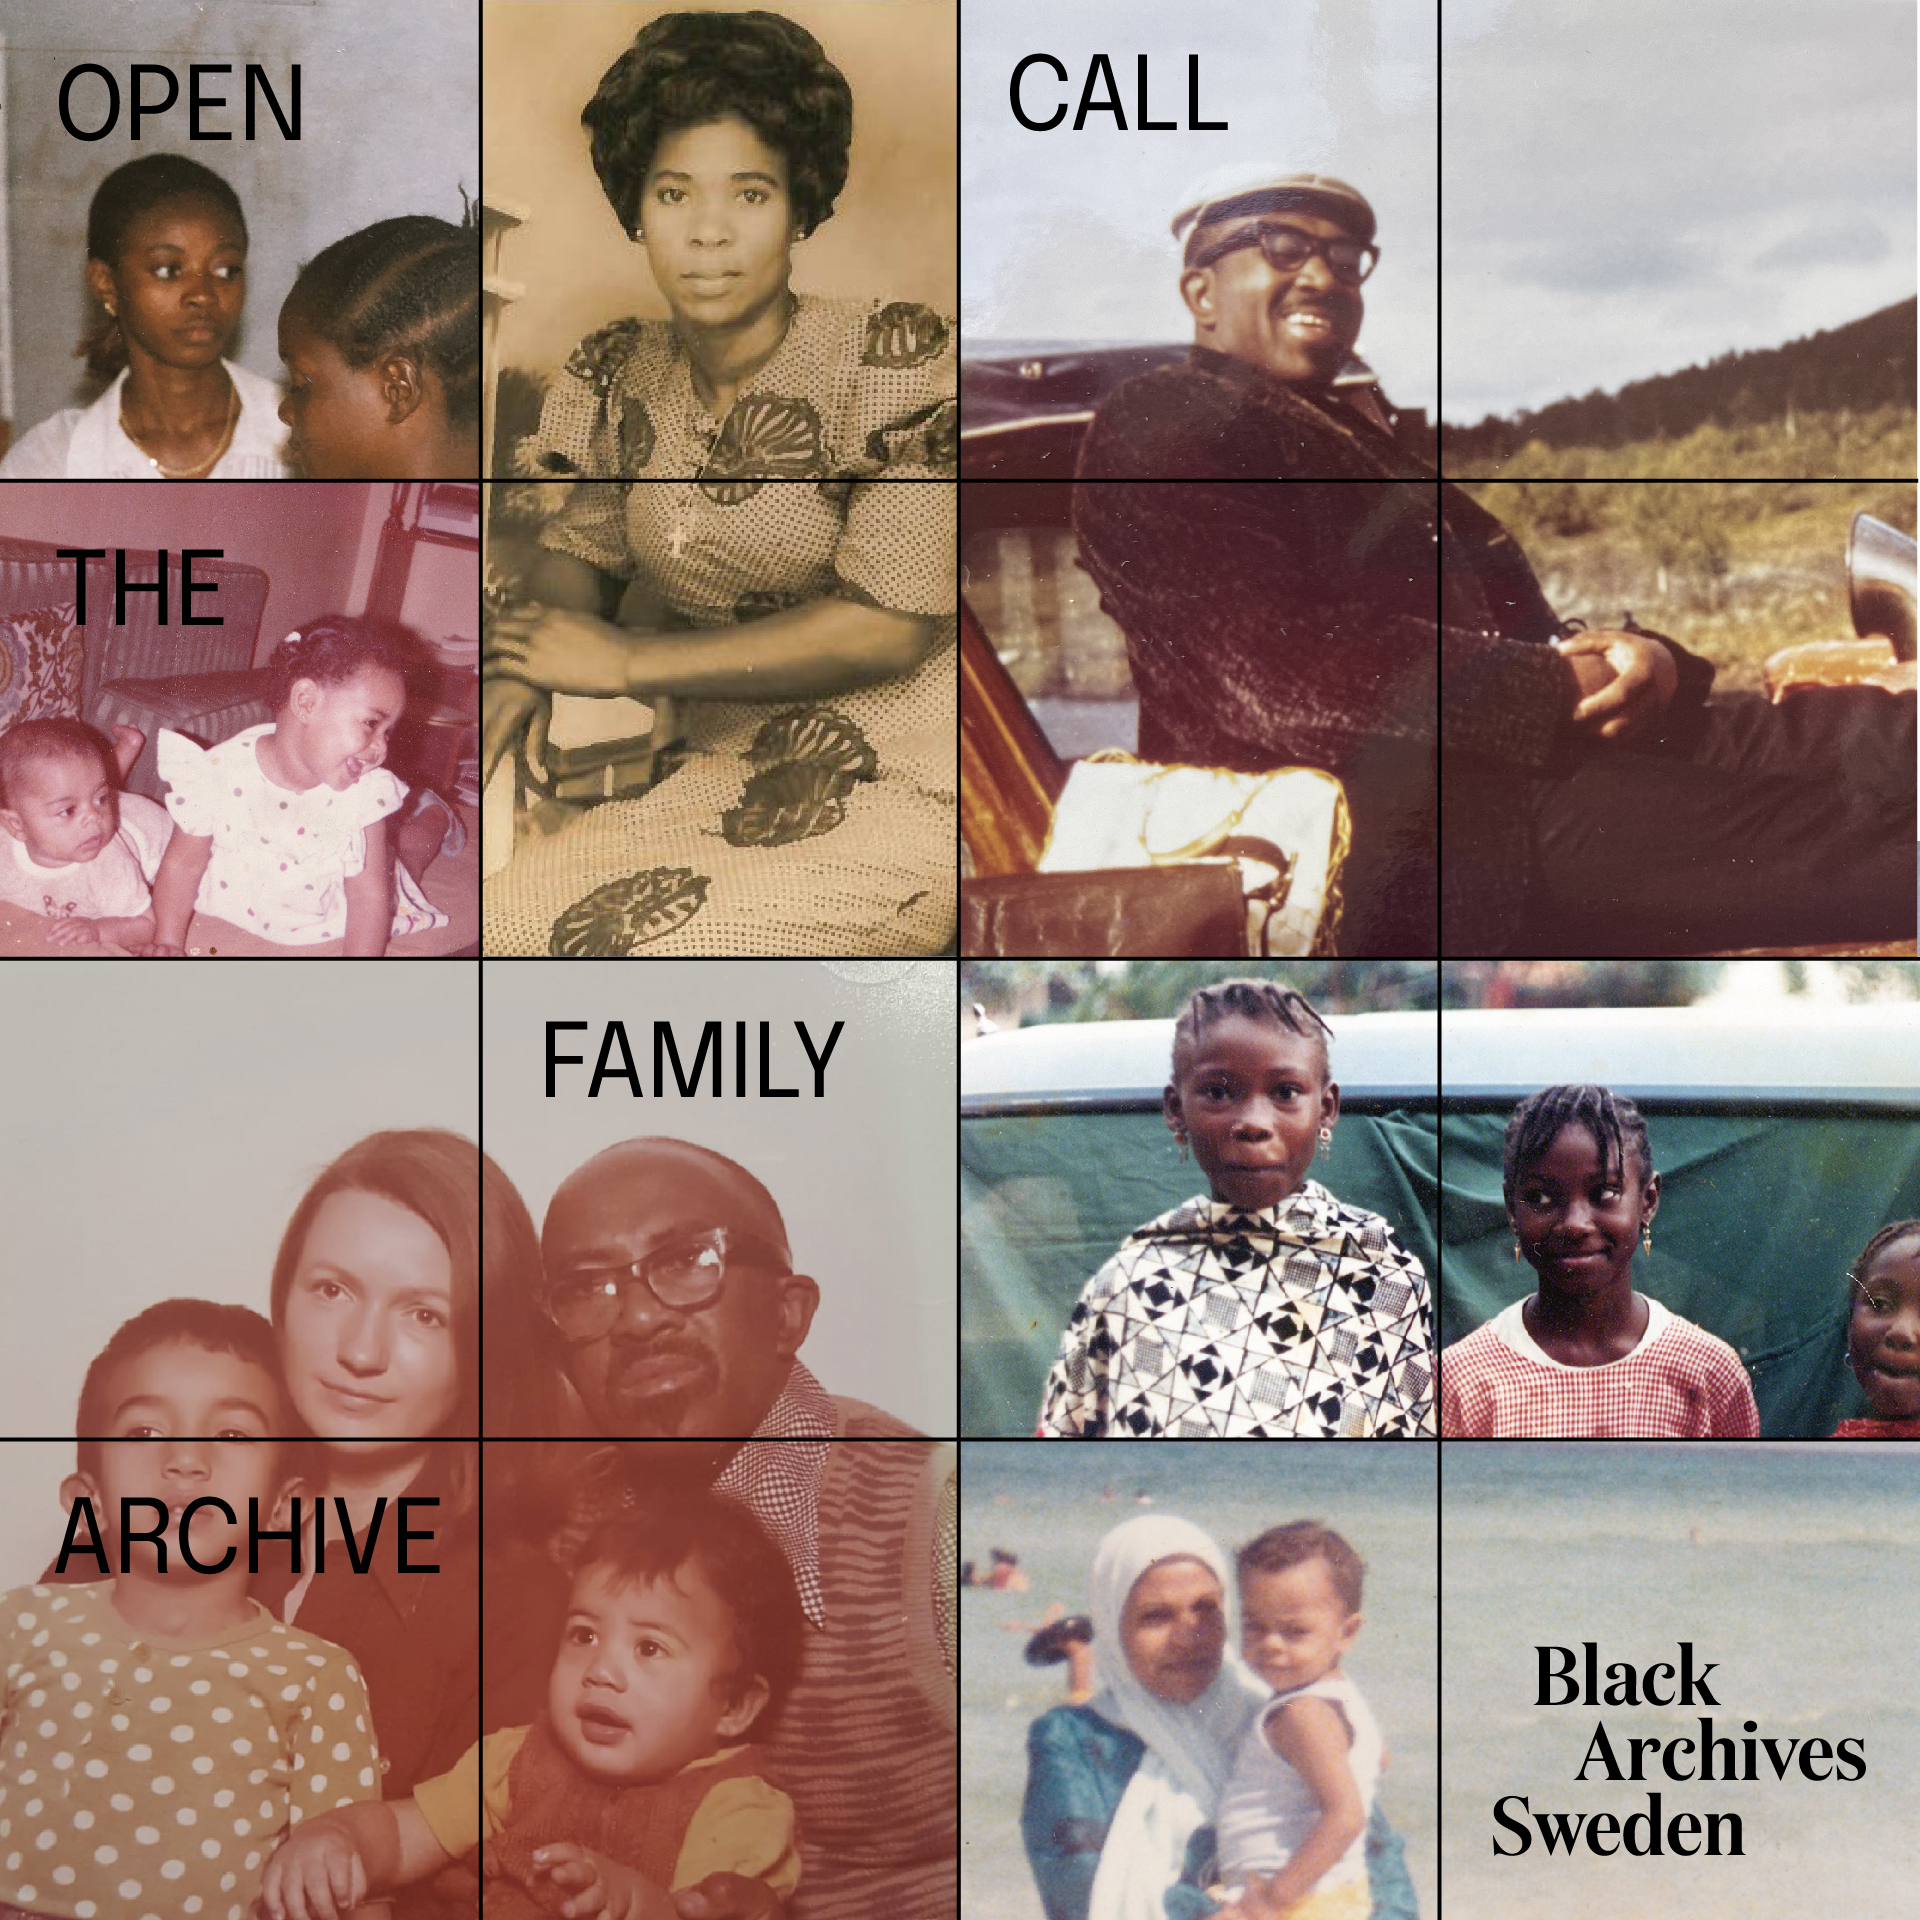 A poster with different images of Black people and the text Open Call, The family Archive. And a logo that says Black Archives Sweden